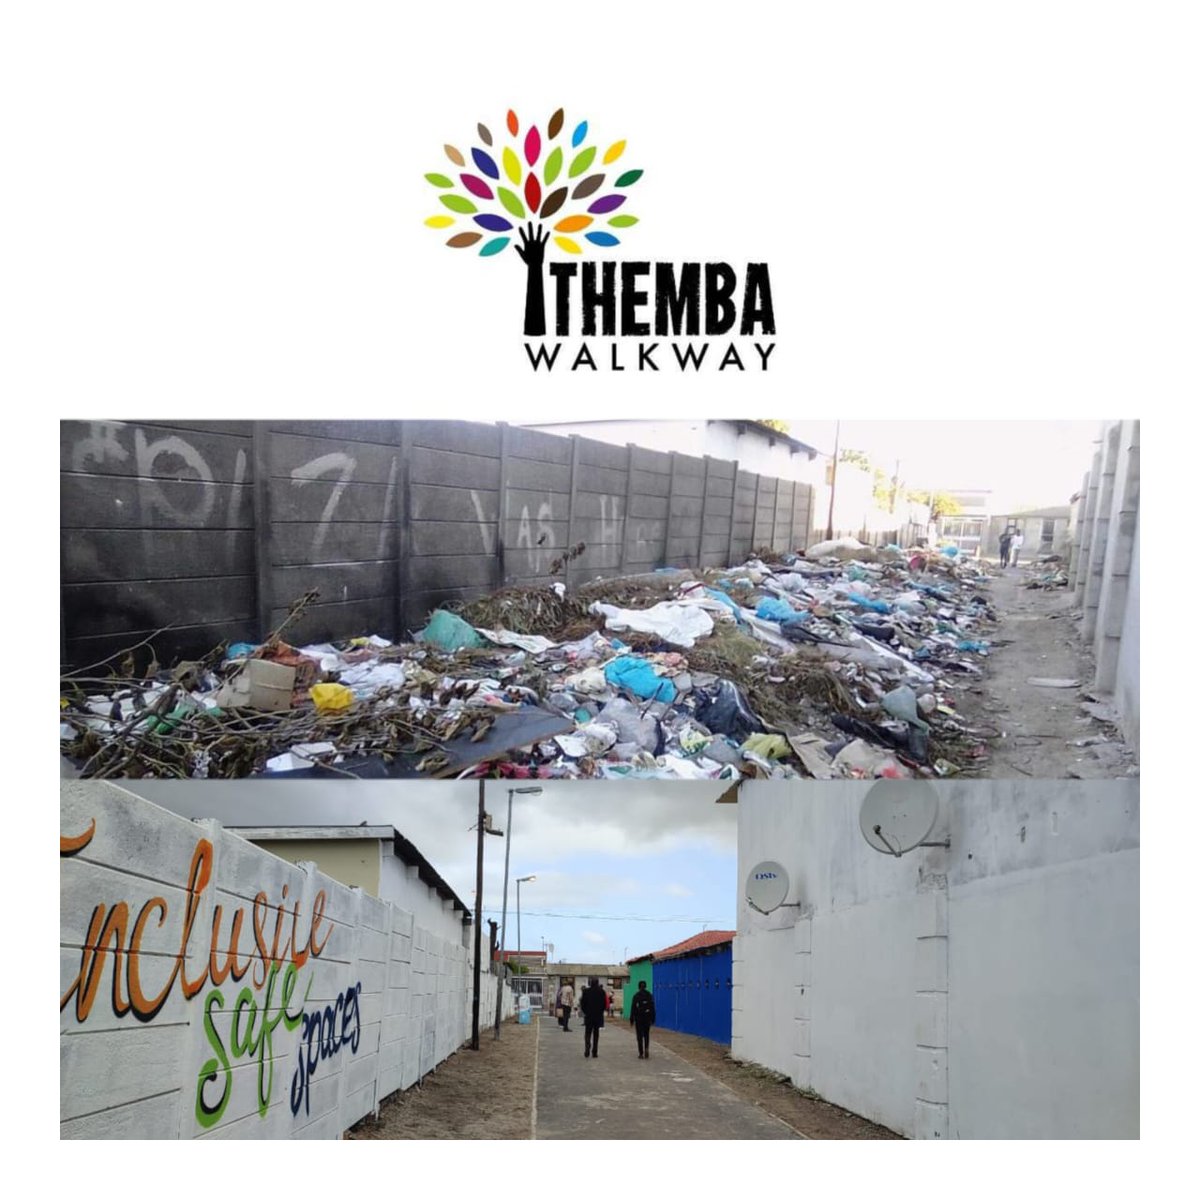 @KombGreen @ECOWARRIORSS @GeraldKutney @IrlEmbKenya @KeForestService @IFIAD_IRELAND @MikeSonko @lamsmykenya @onetreeplanted @PopnMatters @Sdg13Un This is what we did in Gugulethu Cape Town in South Africa and we have not even finished